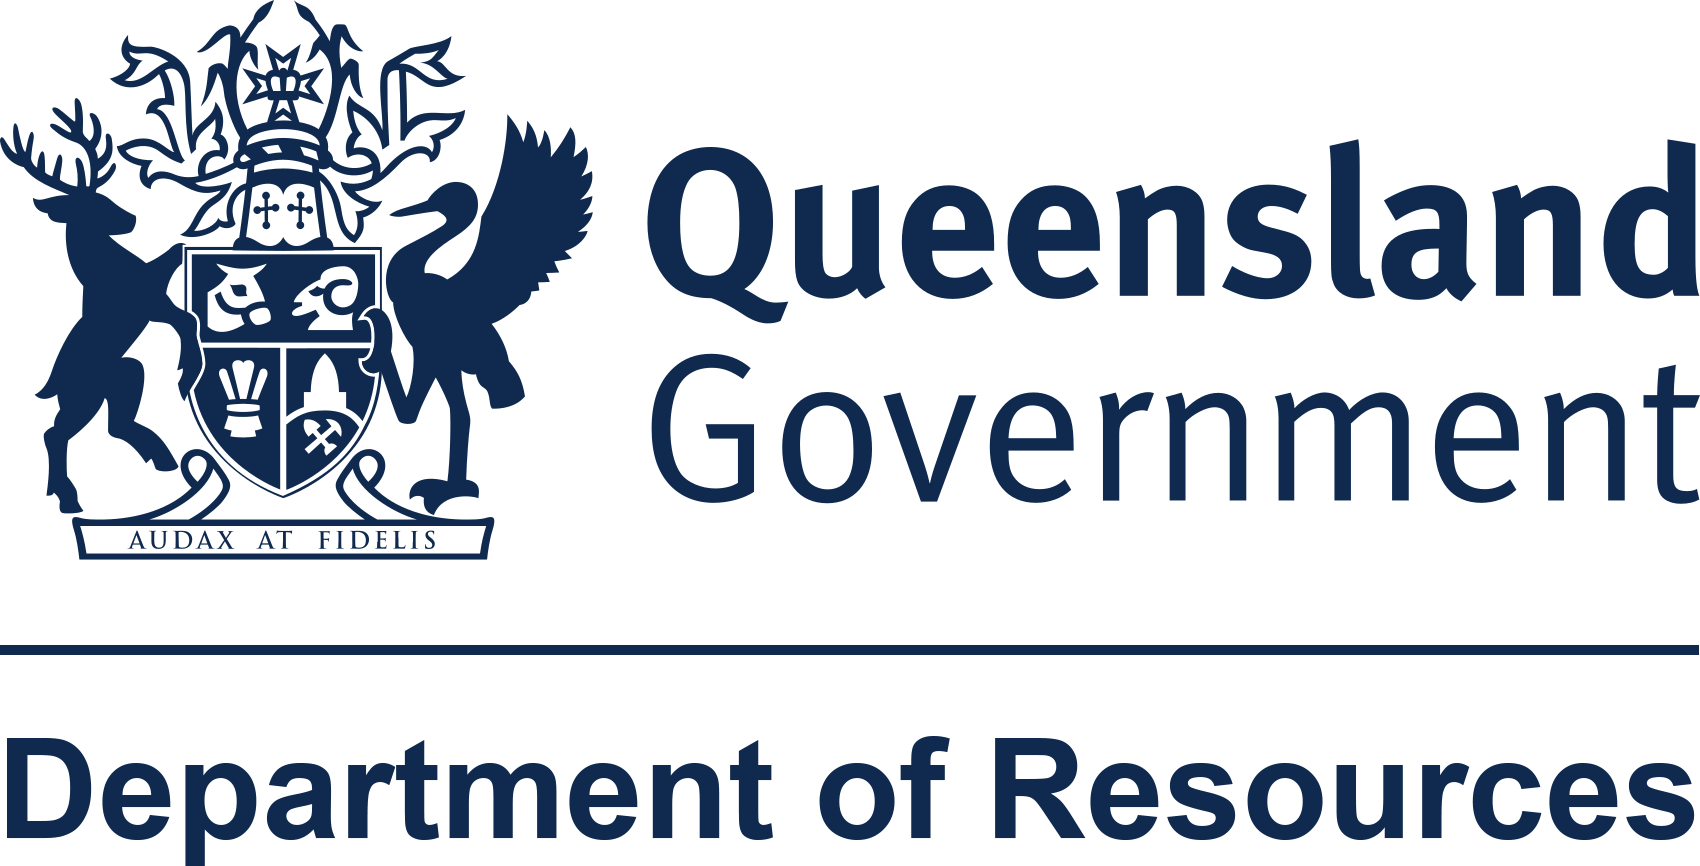 The QLD Government Department Of Resources